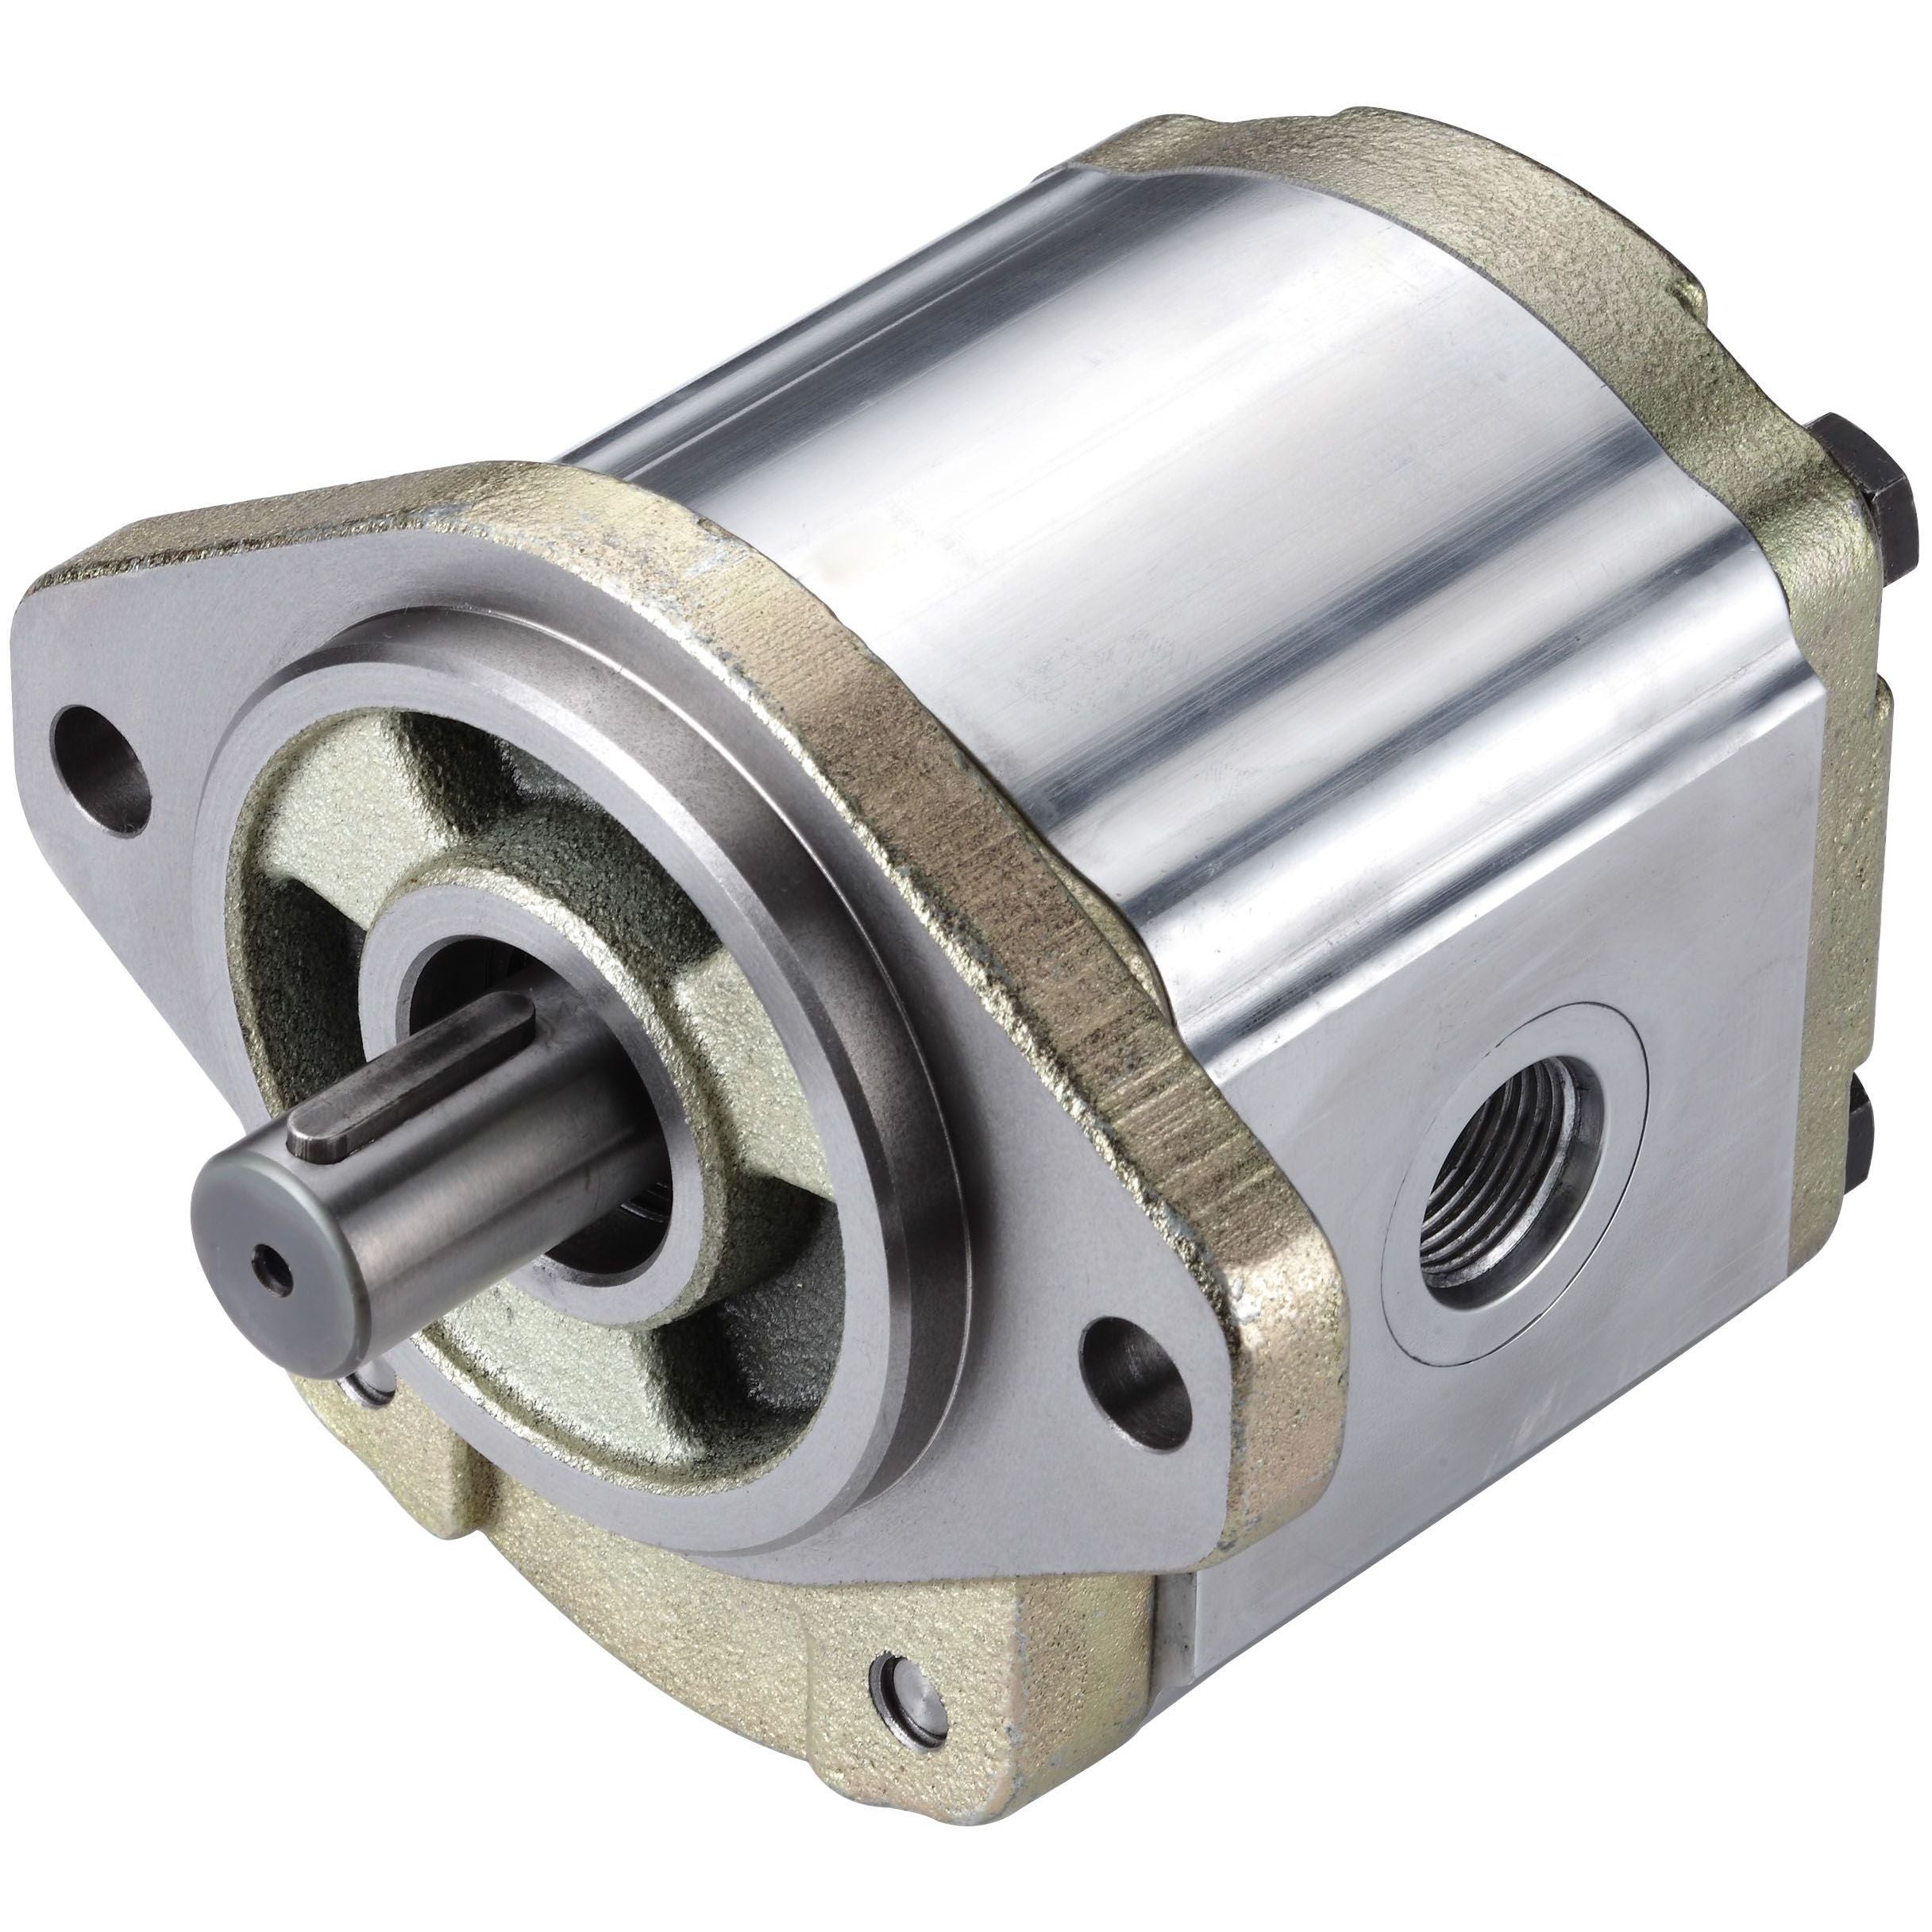 3GB8U325R : Honor Gear Pump, CW Rotation, 25cc (1.53in3), 11.89 GPM, 3500psi, 3000 RPM, #24 SAE (1.5") In, #16 SAE (1") Out, Splined Shaft 13-Tooth, 16/32 Pitch, SAE B 2-Bolt Mount